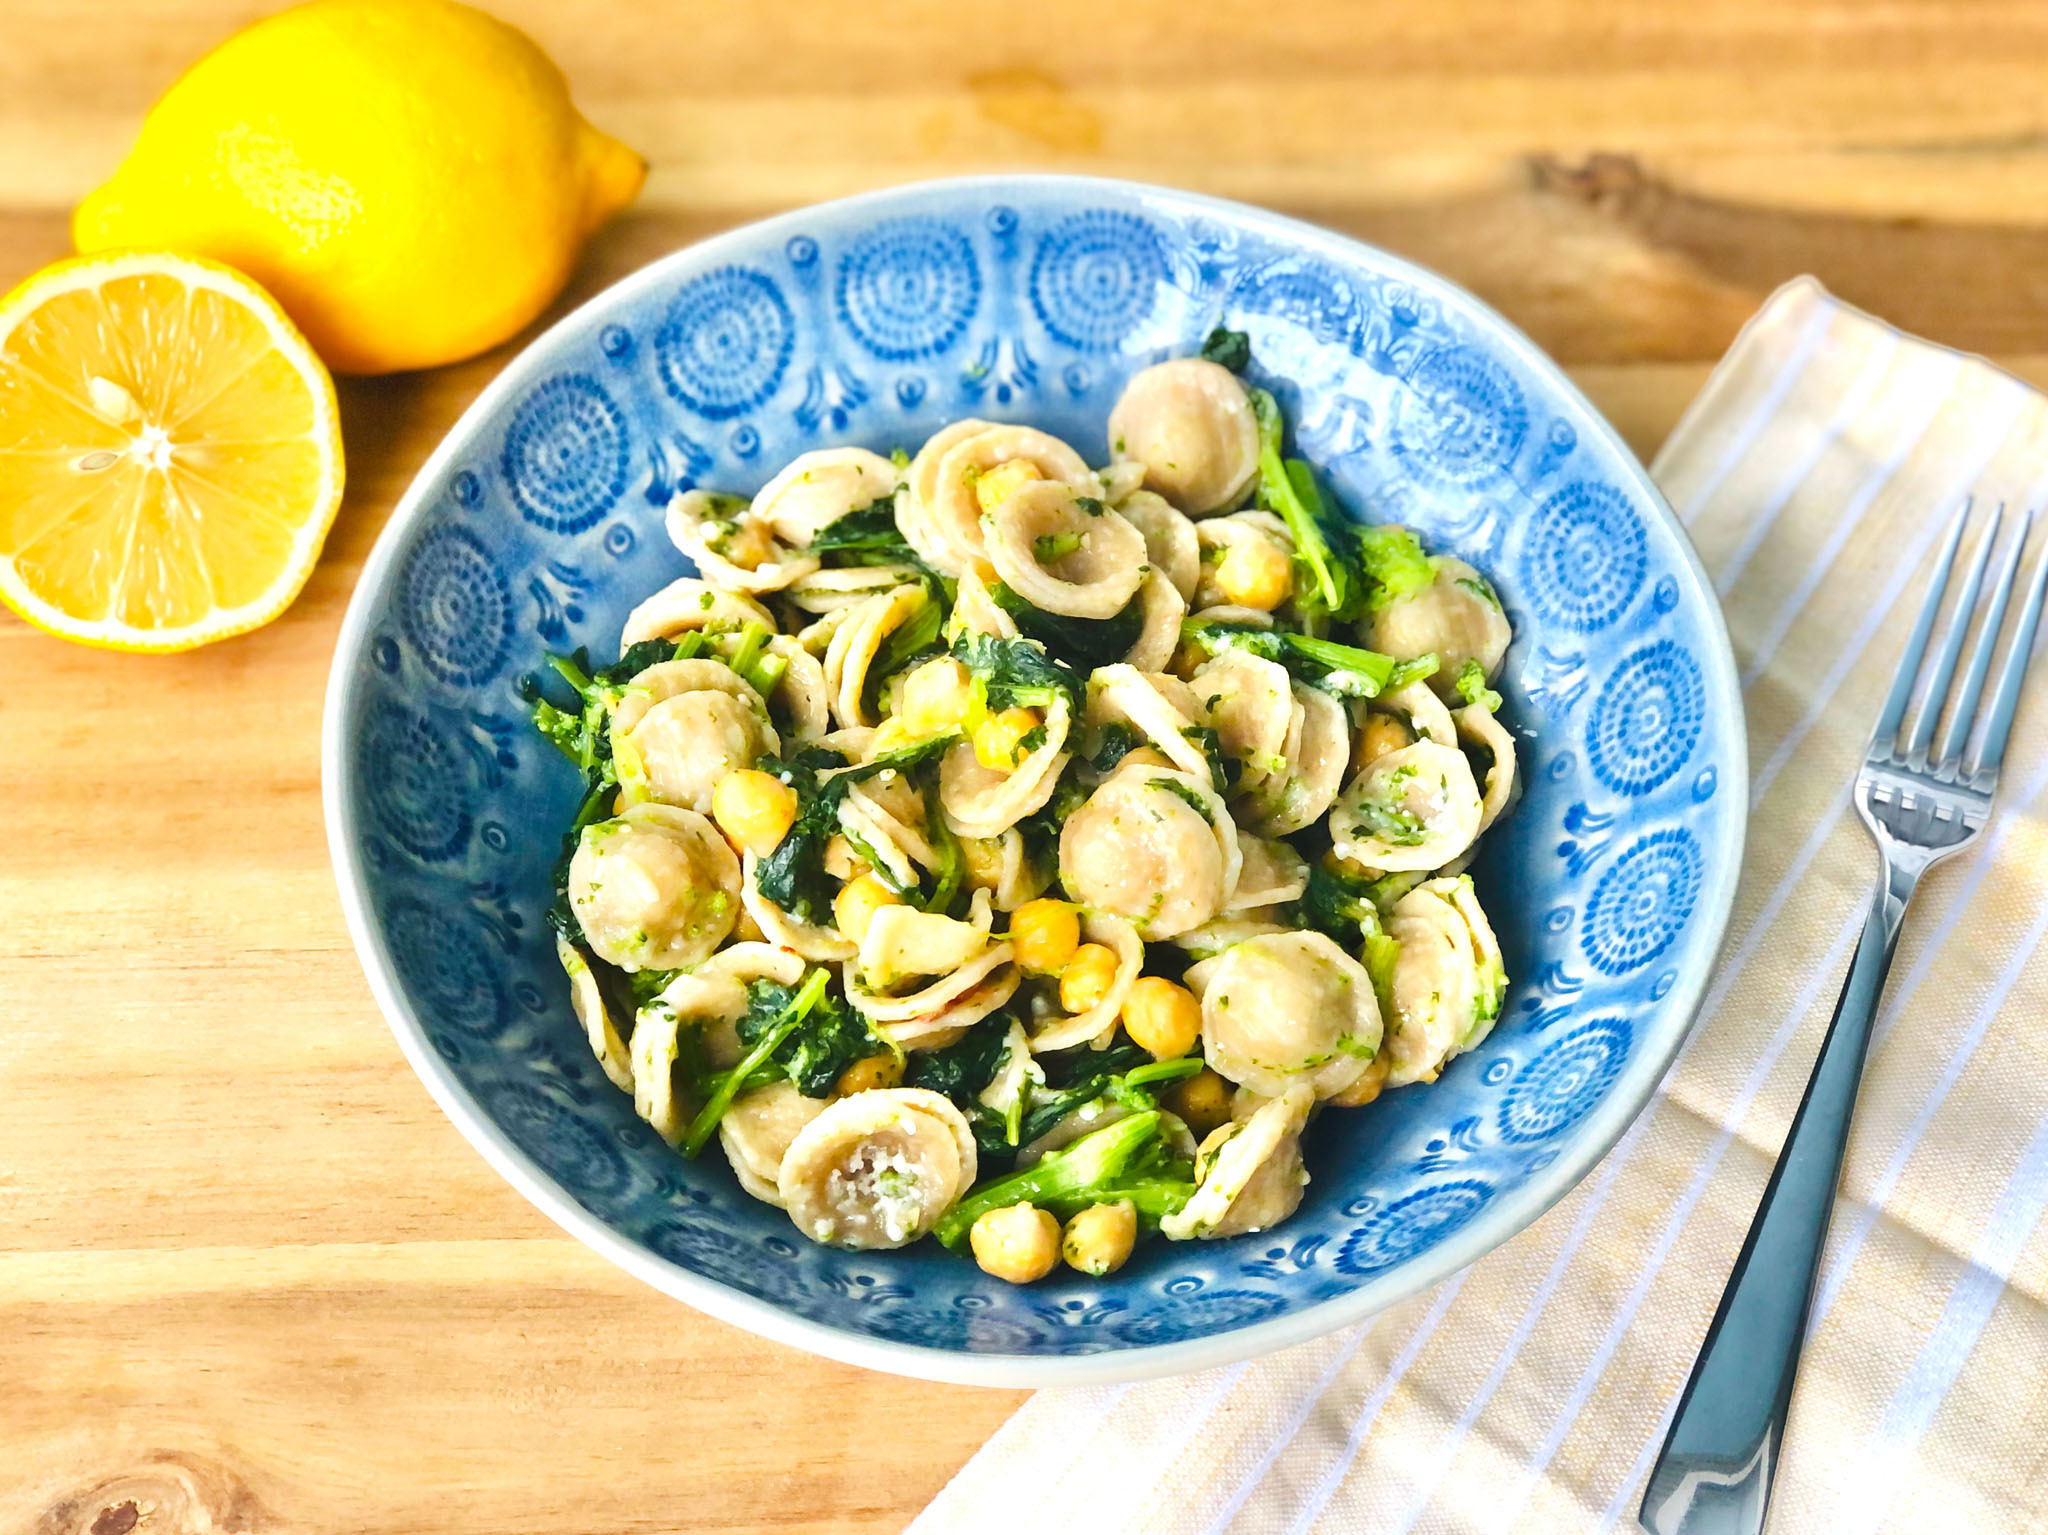 Orecchiette with Chickpeas and Greens Image